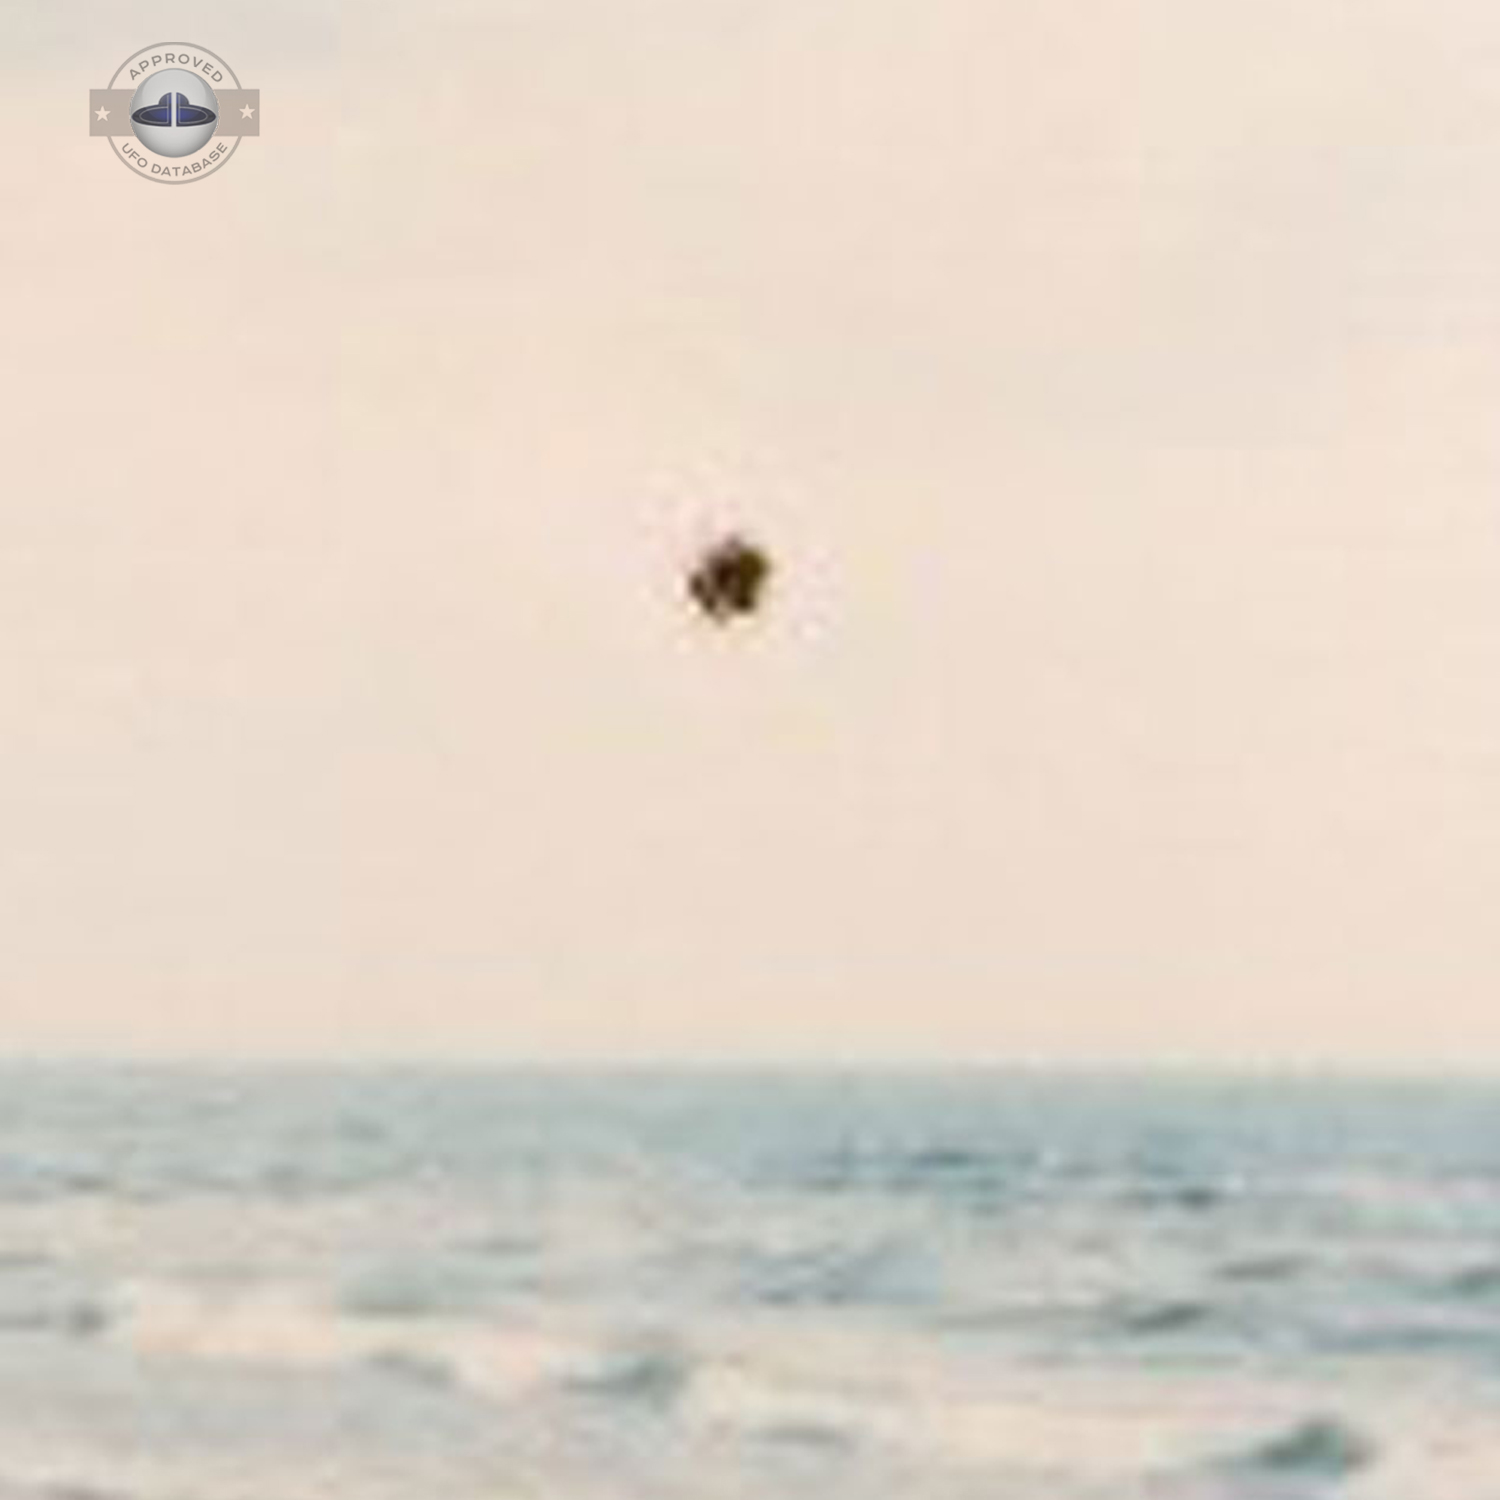 UFO Picture - UFO Sighting over Great Lake Michigan - October 1979 UFO Picture #91-3